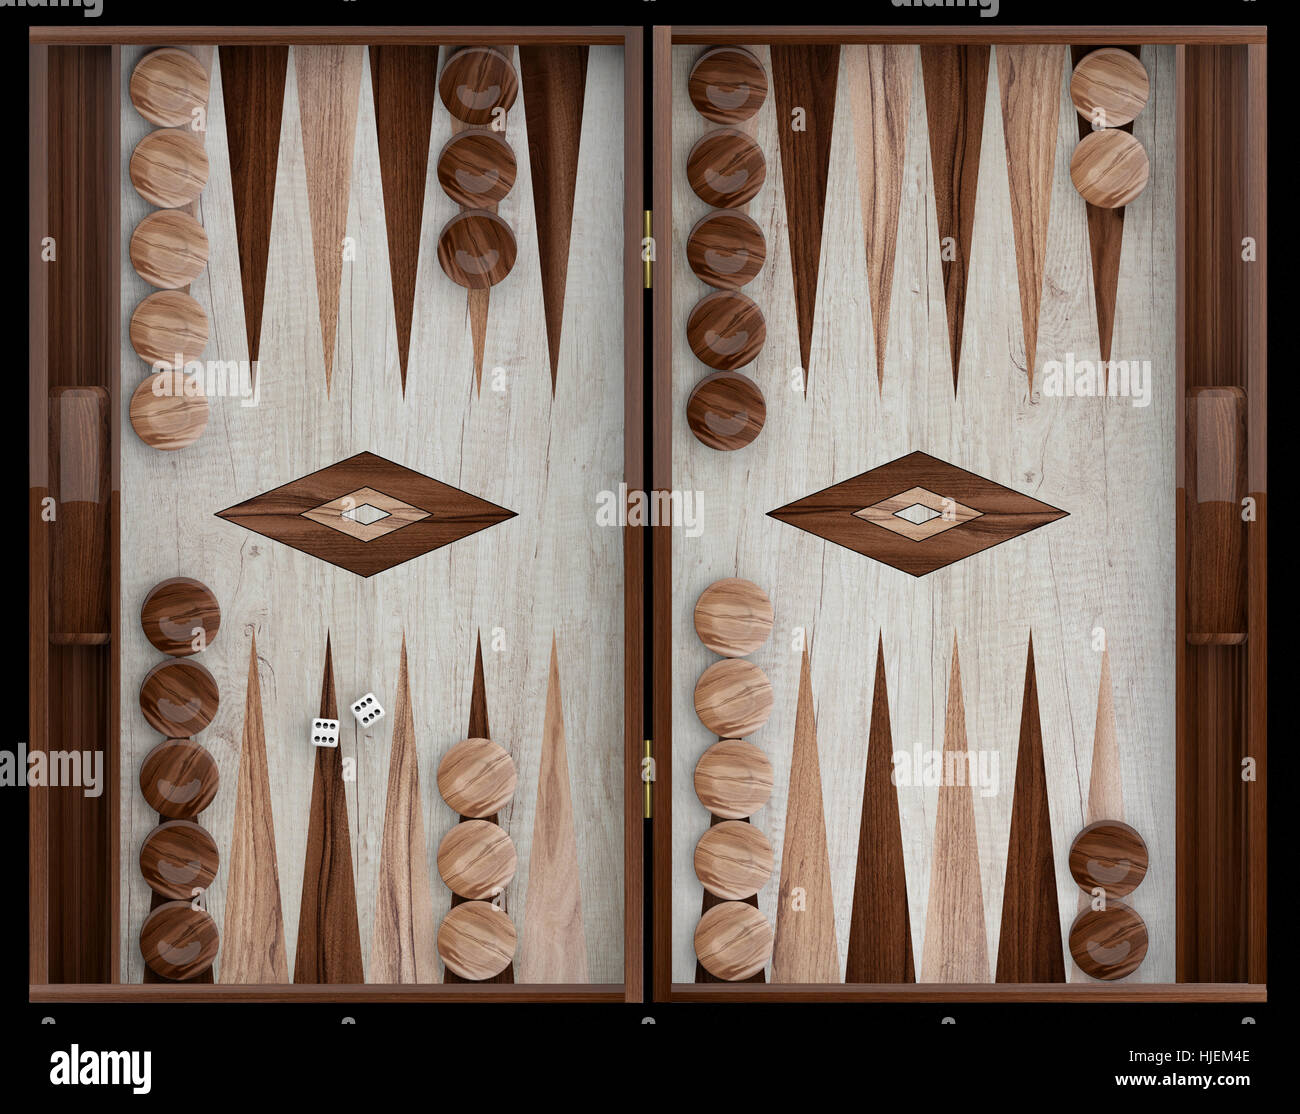 Wooden backgammon board and pieces. 3d illustration Stock Photo